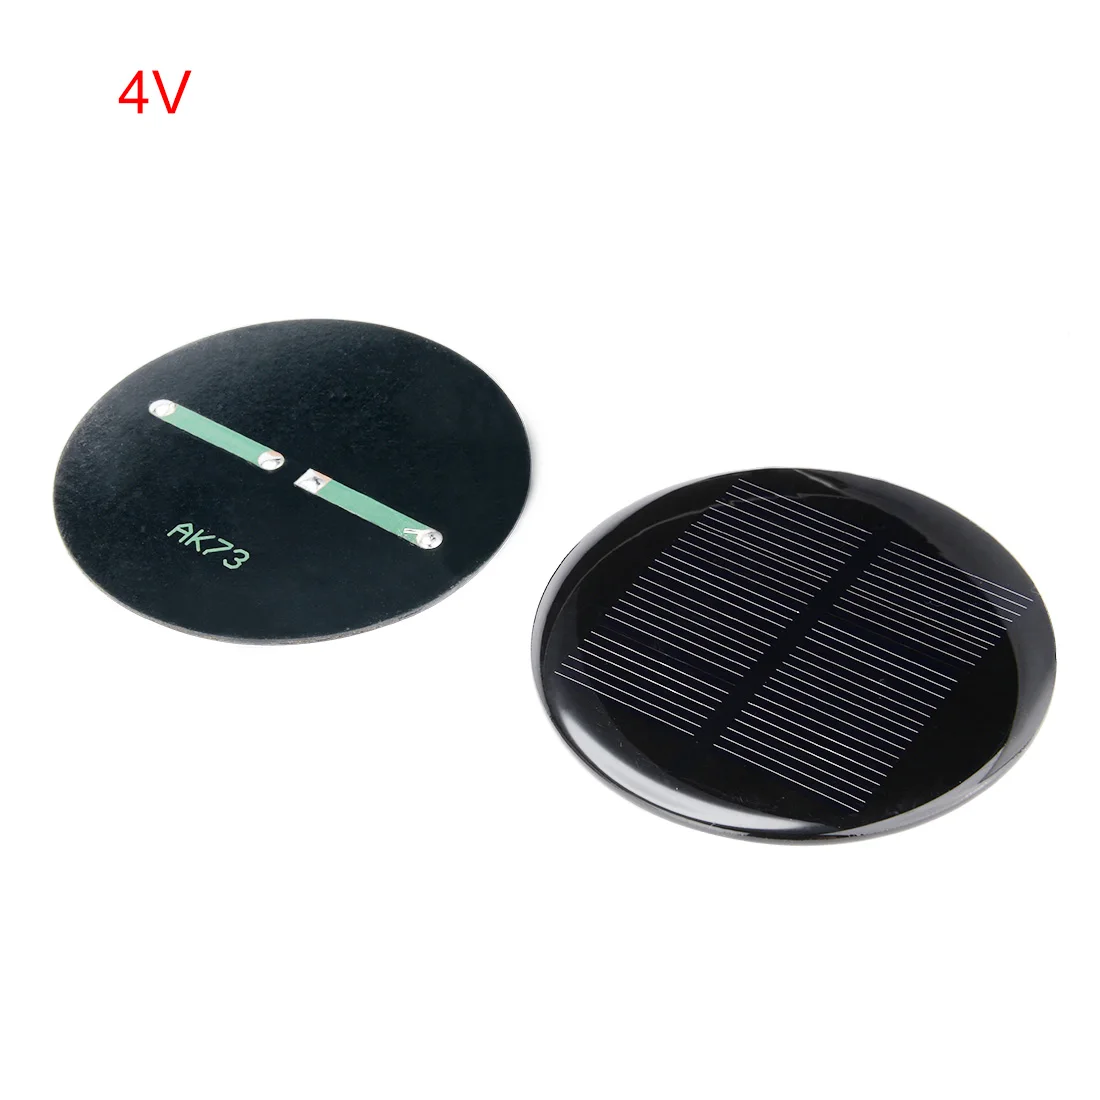 

5Pcs 4V 80mA Solar Panel DIY Mini Polycrystalline Silicon Solar Cell Module Solar Panel Power Accessories for Light Toys Charger